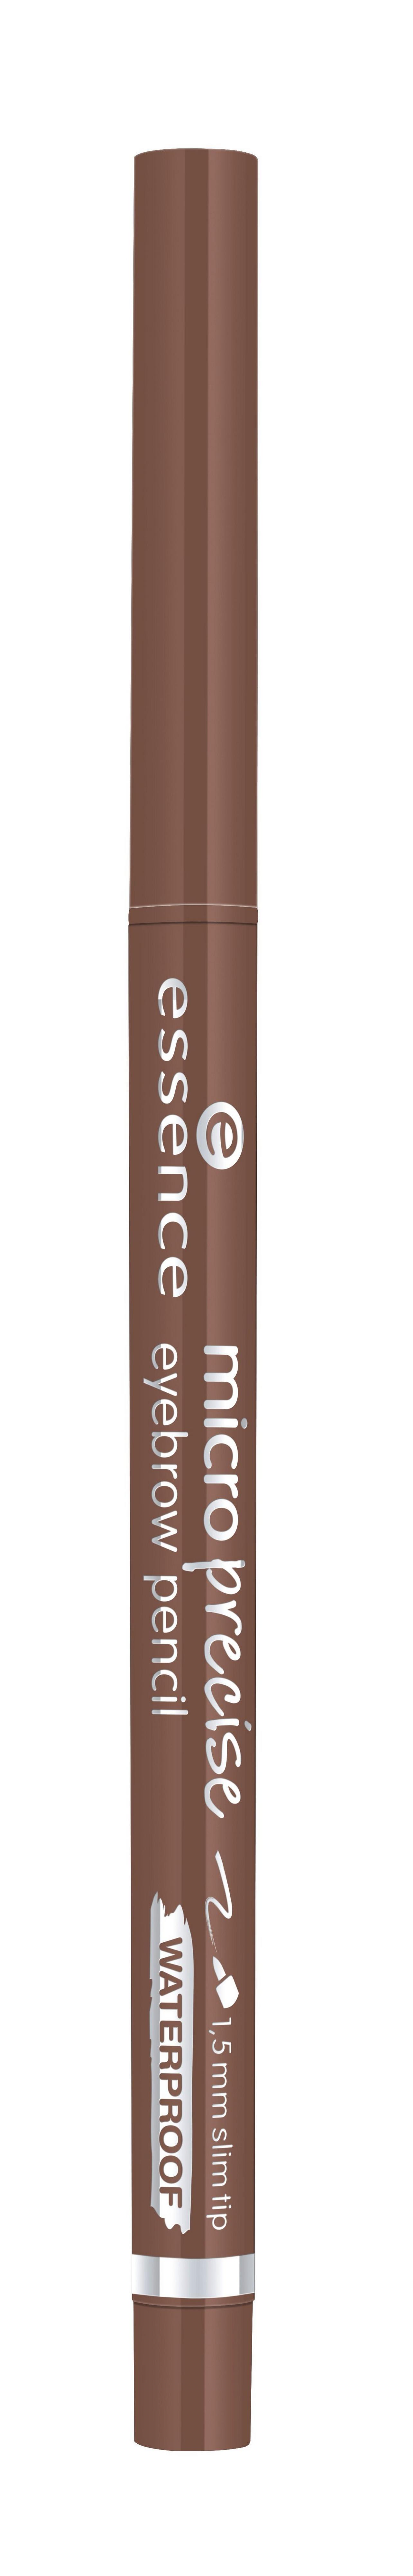 Image of essence Micro Precise Eyebrow Pencil - ONE SIZE